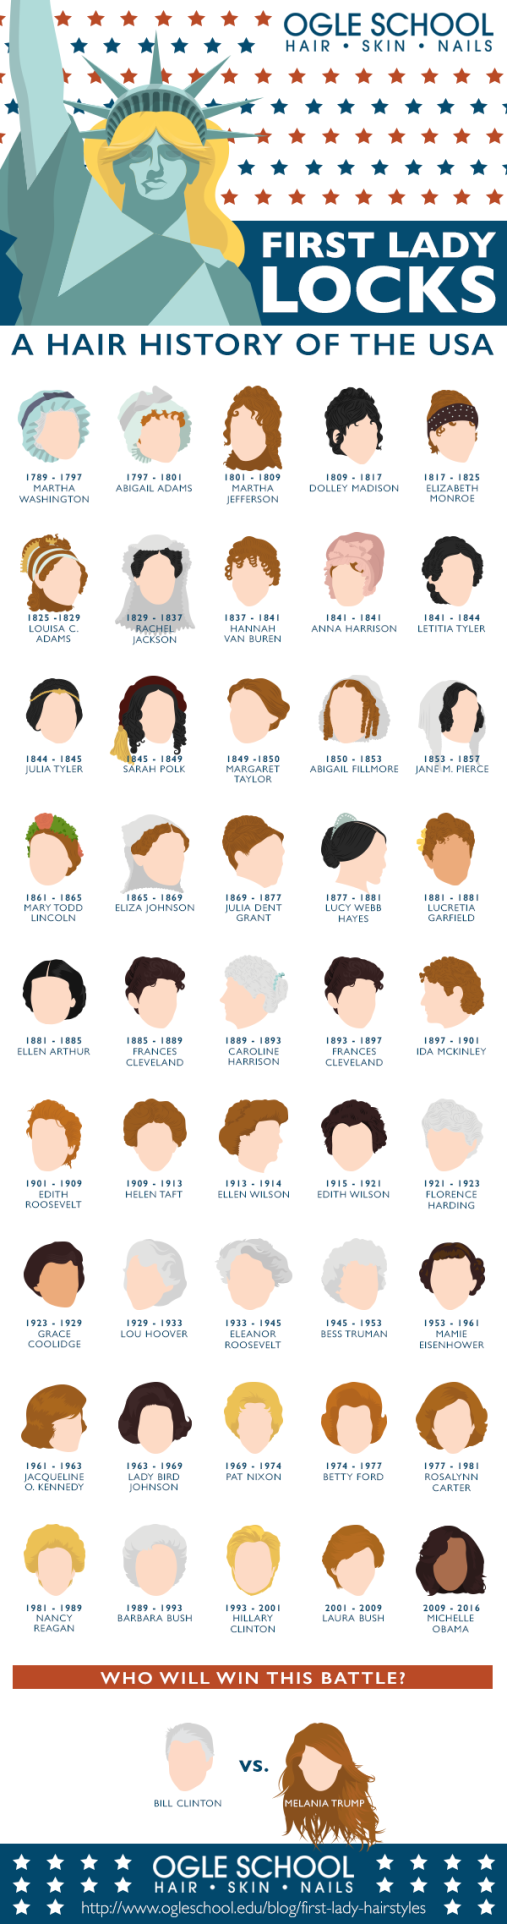 First Lady Locks: A Hair History of the USA